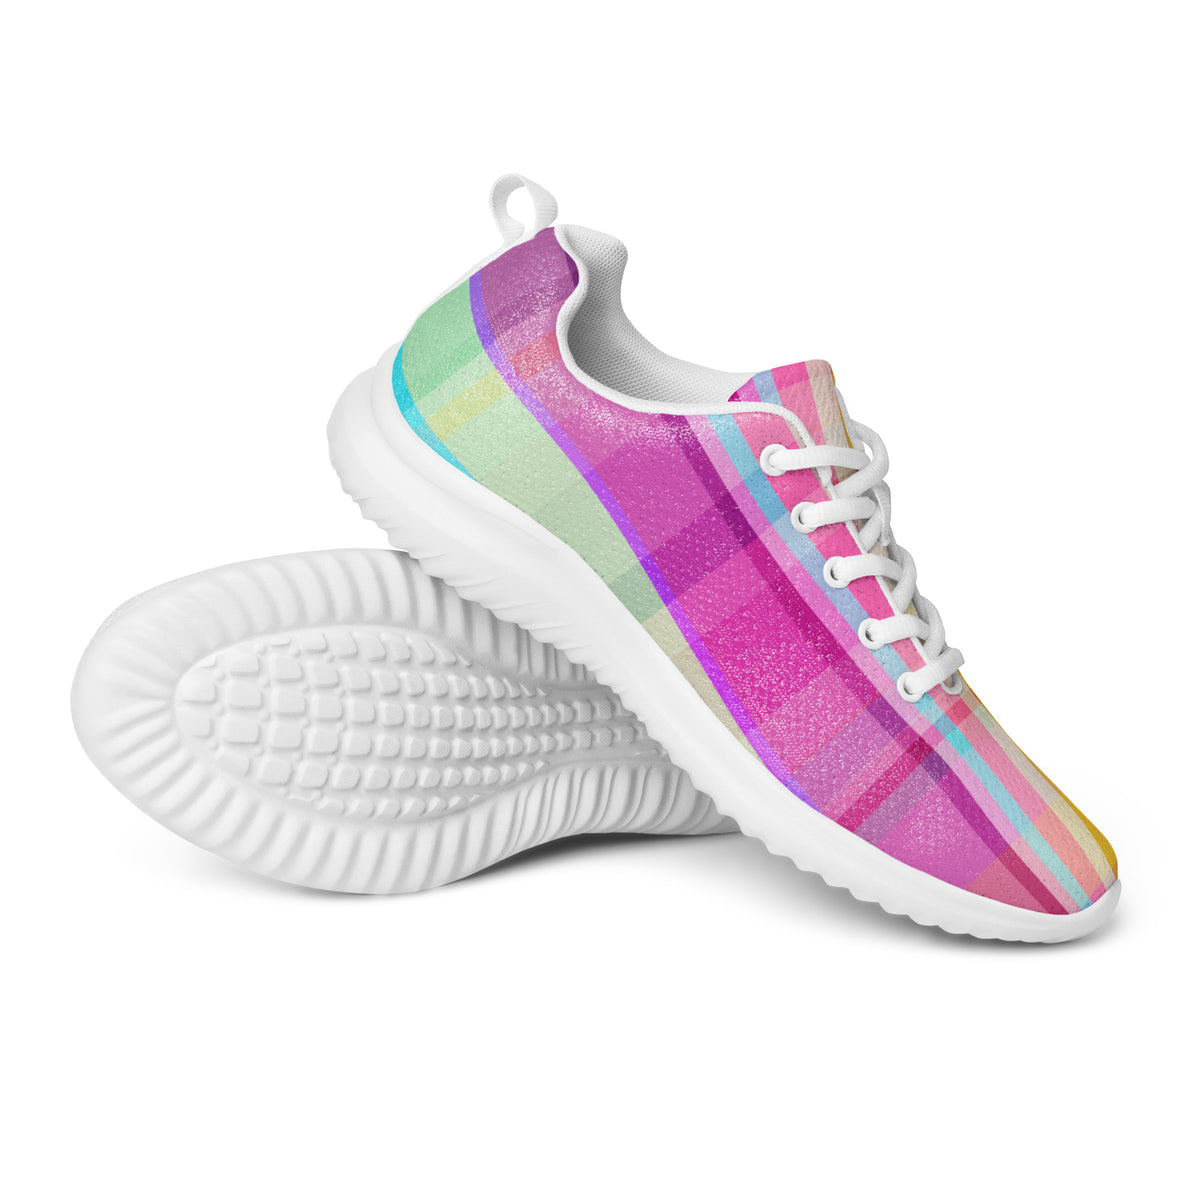 Brighten up your run with Fiesta Fit Men's Athletic Shoes, featuring festive colors for a lively workout.